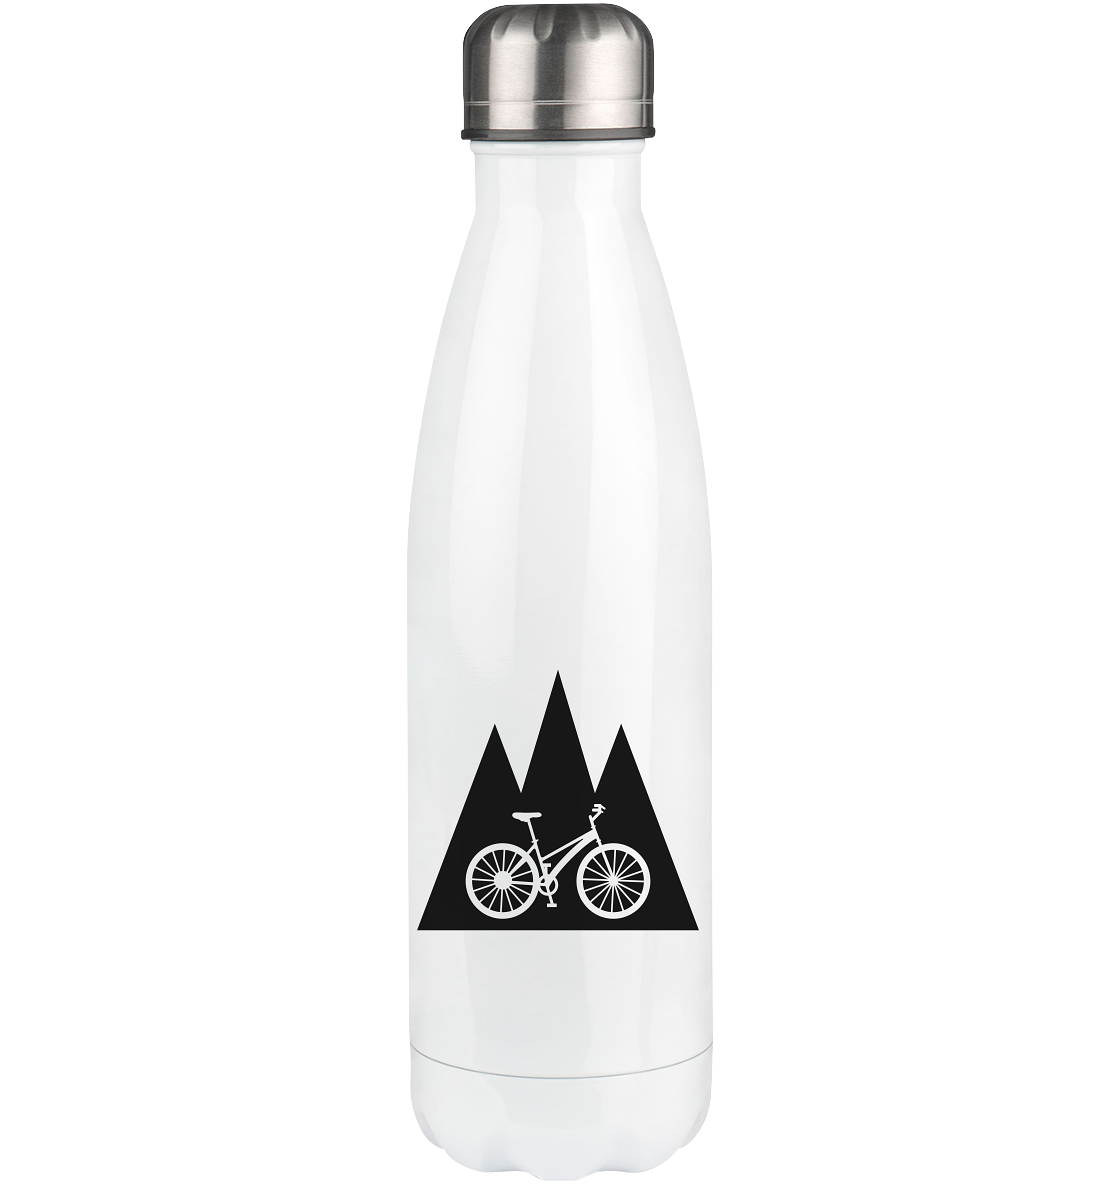 Triangle Mountain and Bicycle - Edelstahl Thermosflasche fahrrad 500ml